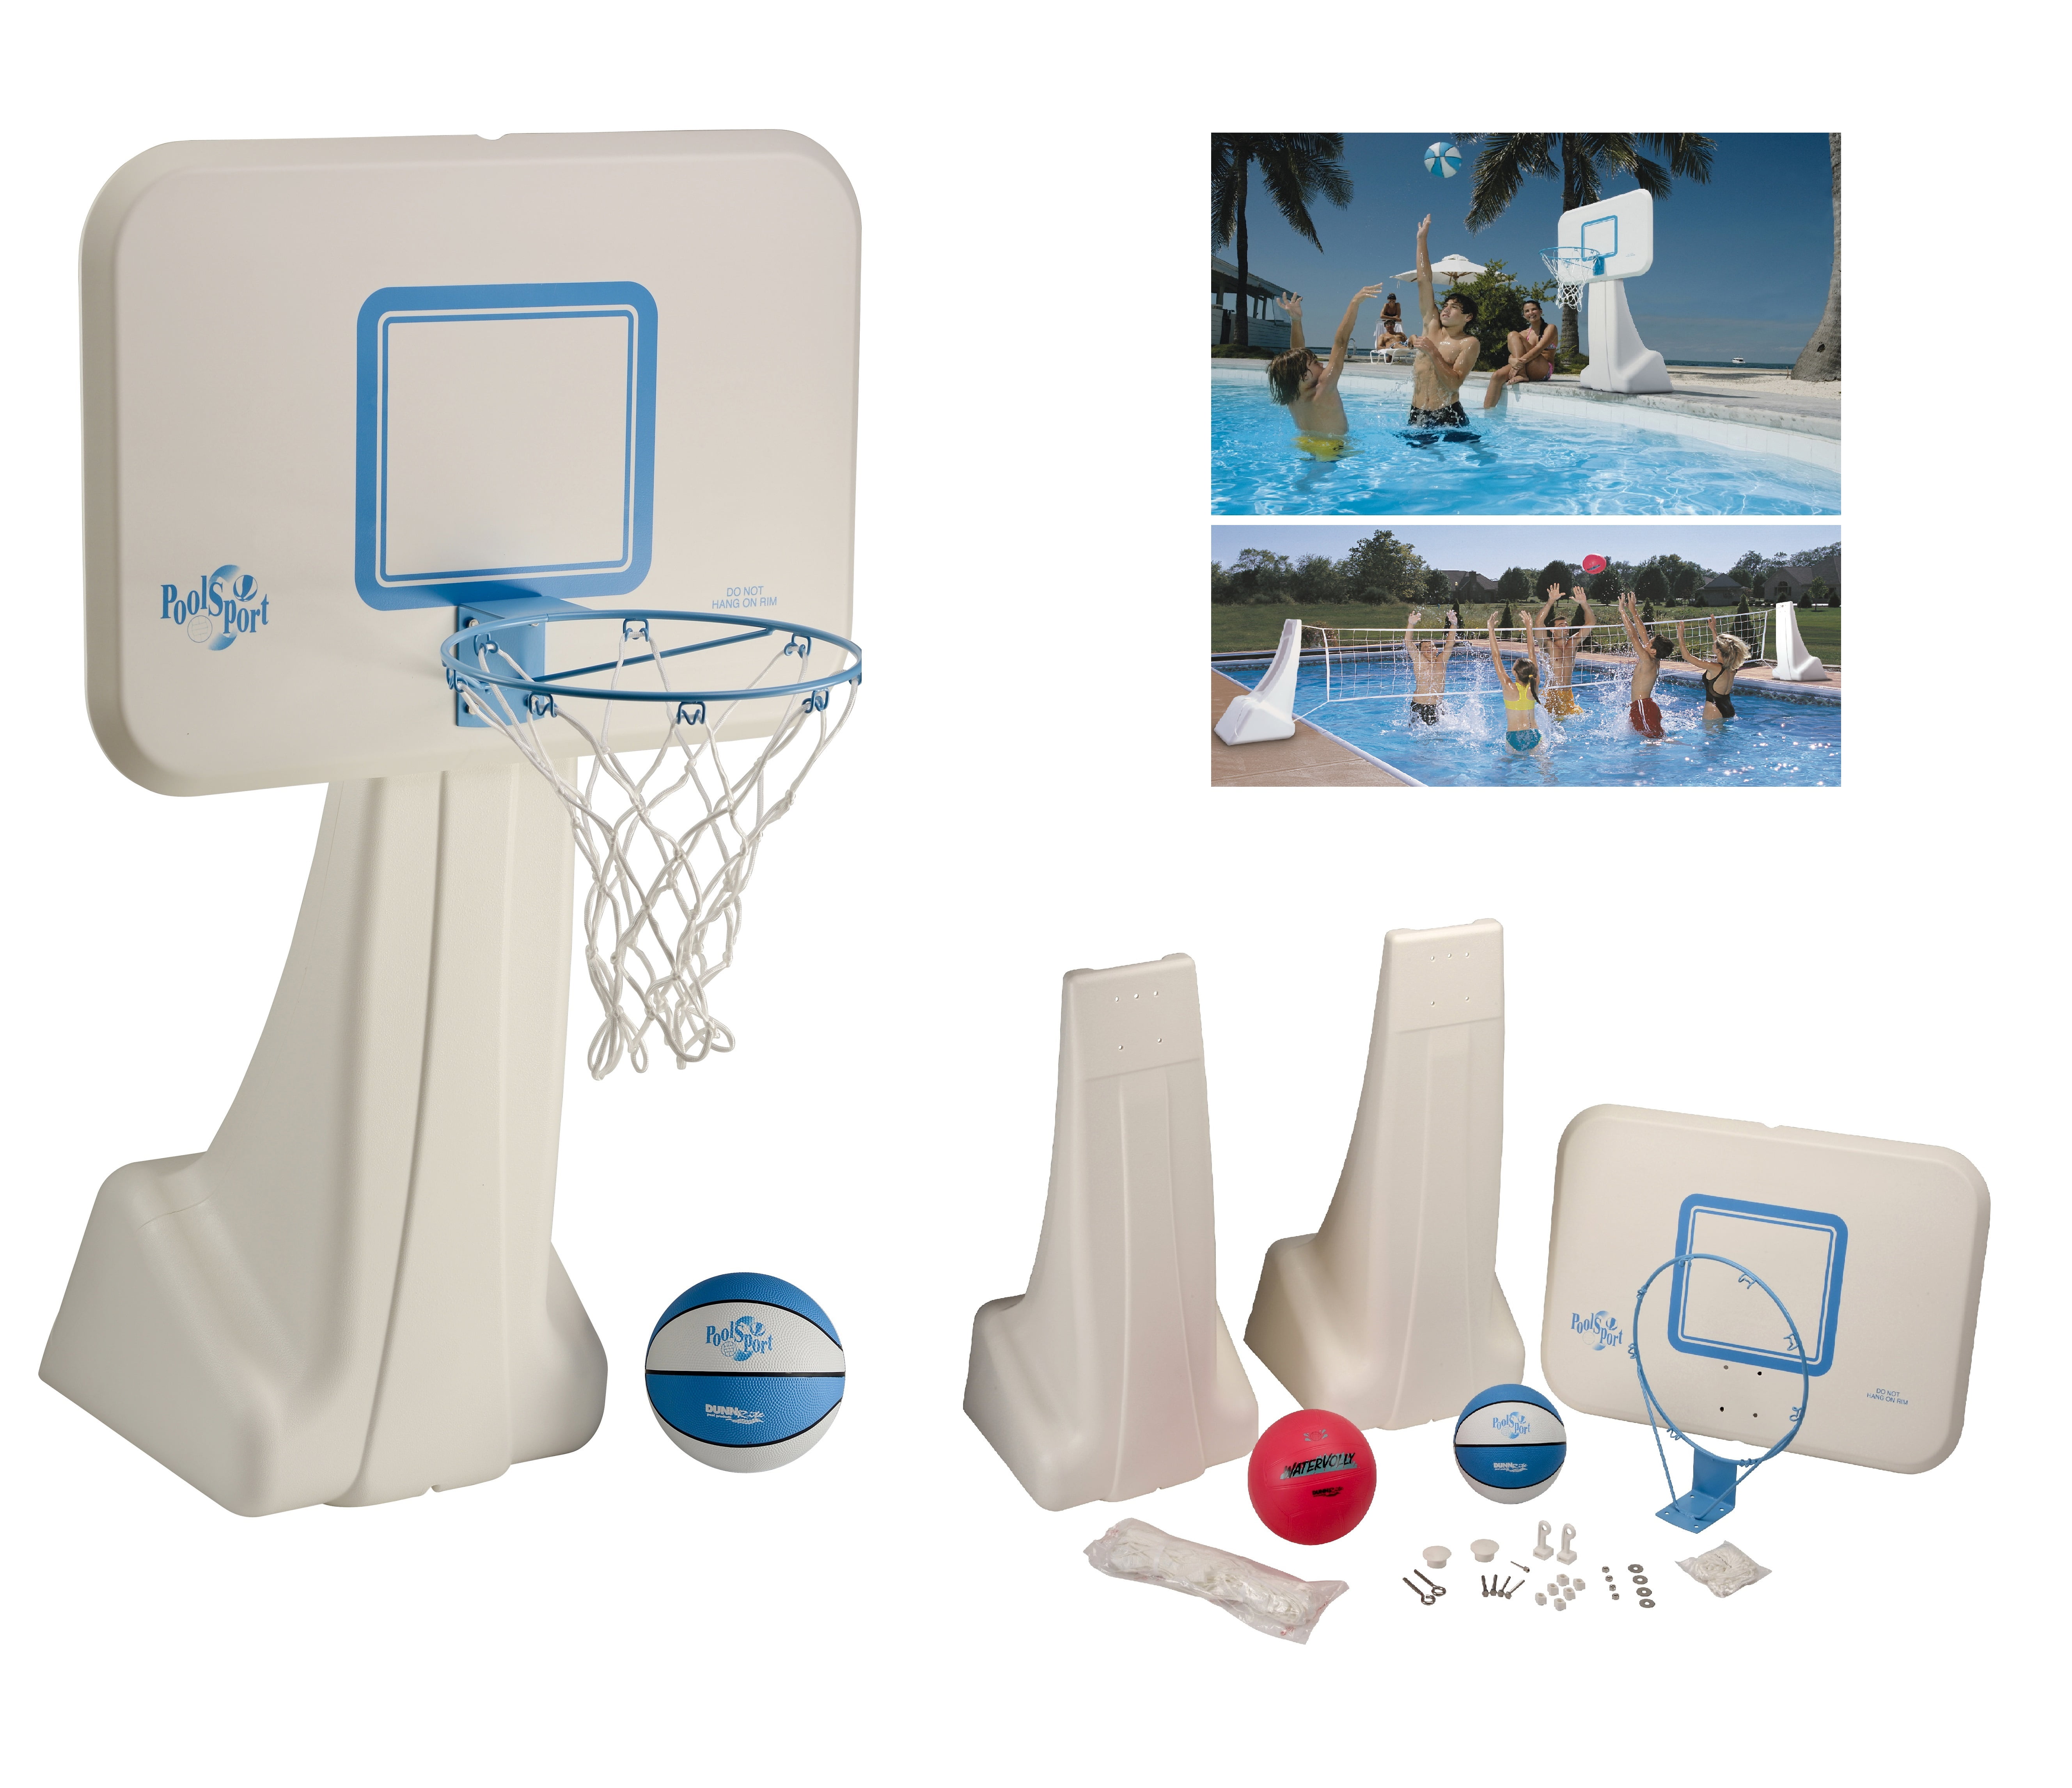 Mini Inflatable Ball &Pump for Kids Boys Girls Teens Summer Outdoor Toys Party Favor Pool Basketball Hoop Toys 30“ Height Floating Stuff Swimming Pool Games Poolside Standing Basketball Hoop with Net 